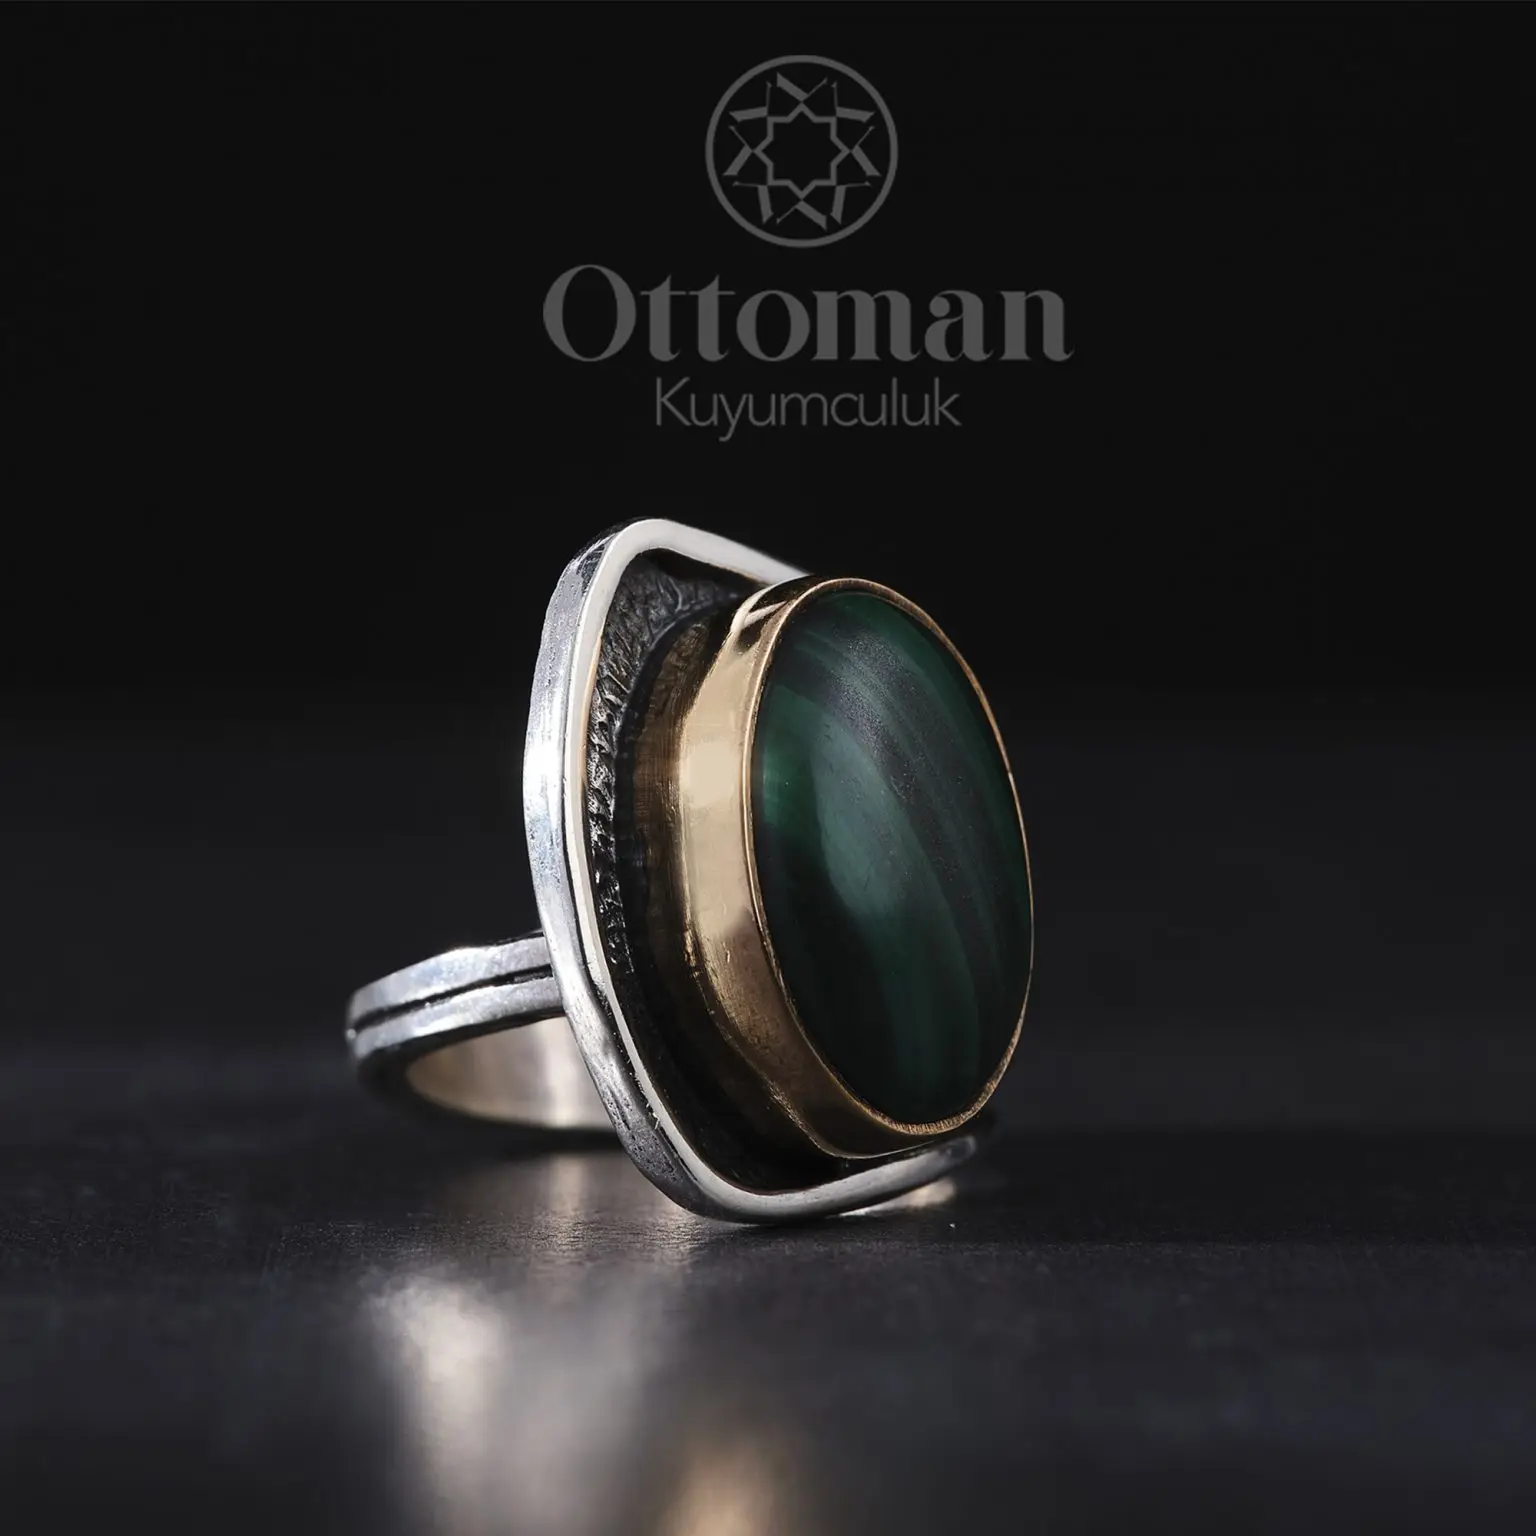 Our Women's Ring Model with Malahit Stone is made of 925 Sterling Silver The structure of the eye-catching orginal malachite sto